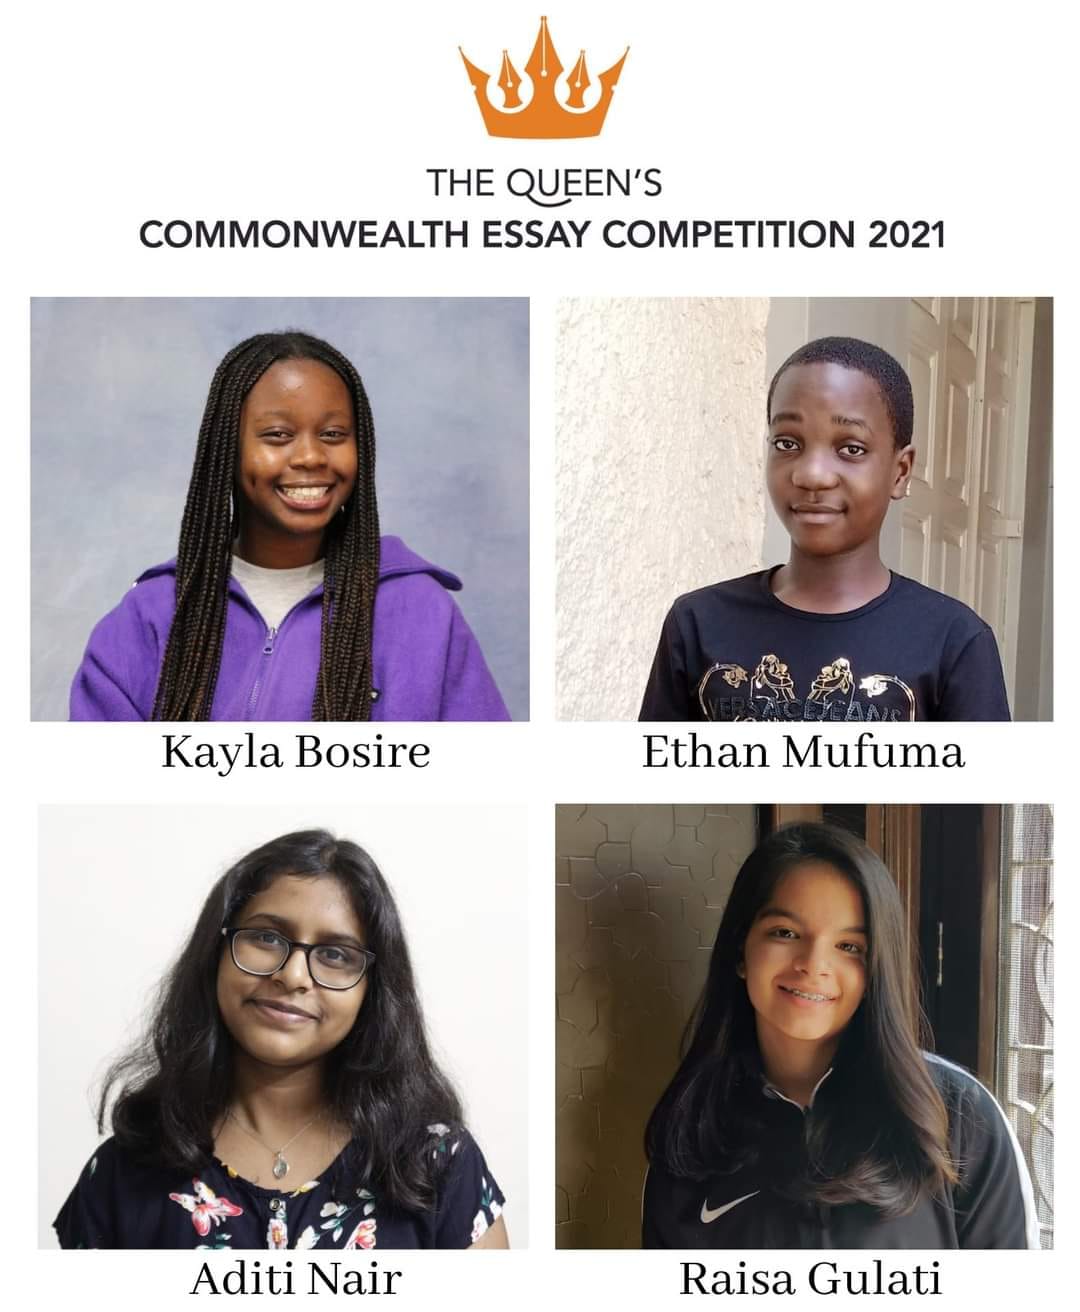 the queen's commonwealth essay competition